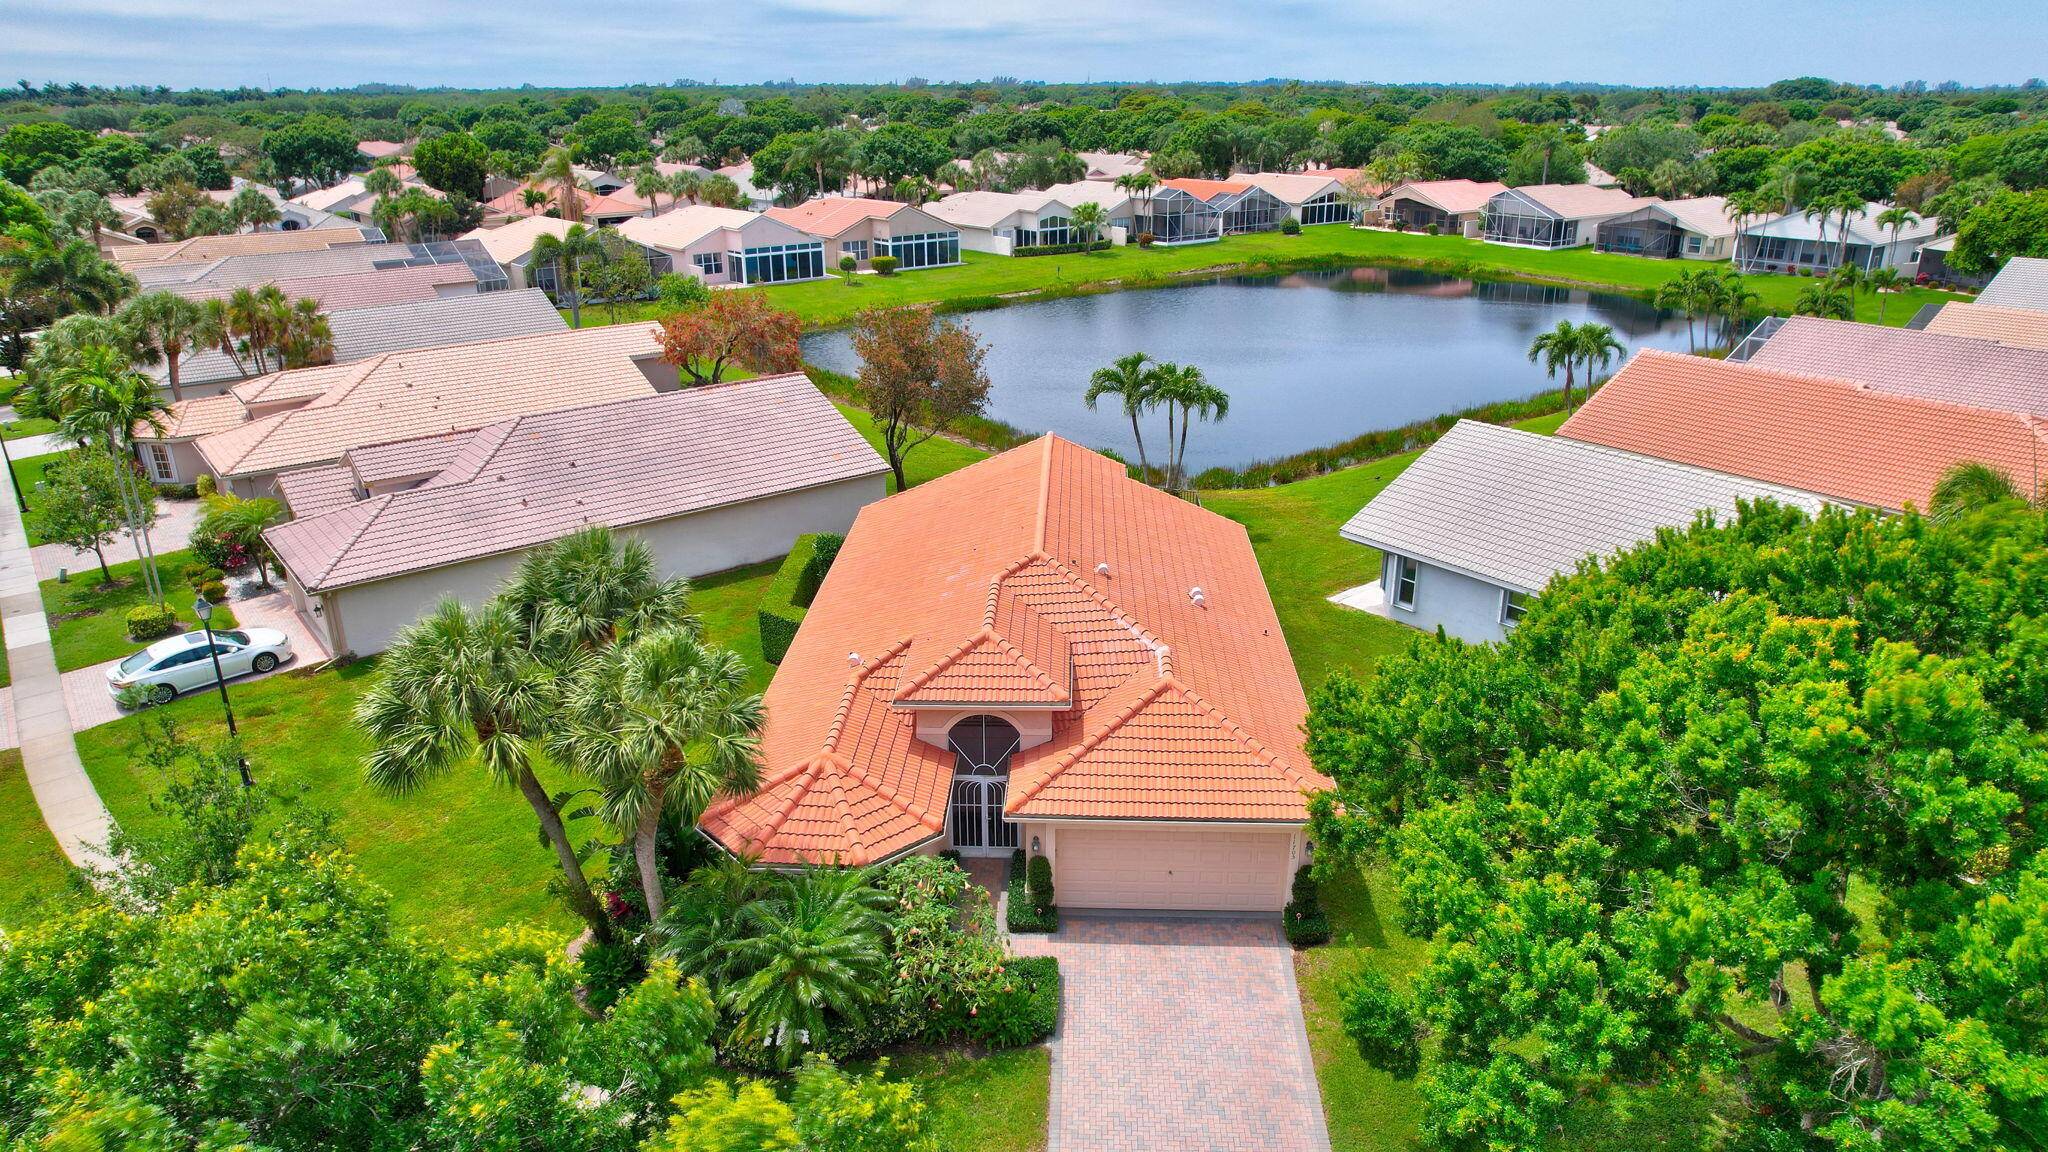 Indulge in the charm of this exquisite three bedroom home, boasting picturesque vistas of a serene lake, complemented by heated pool and spa, lush landscaping and screened covered lanai, a ...